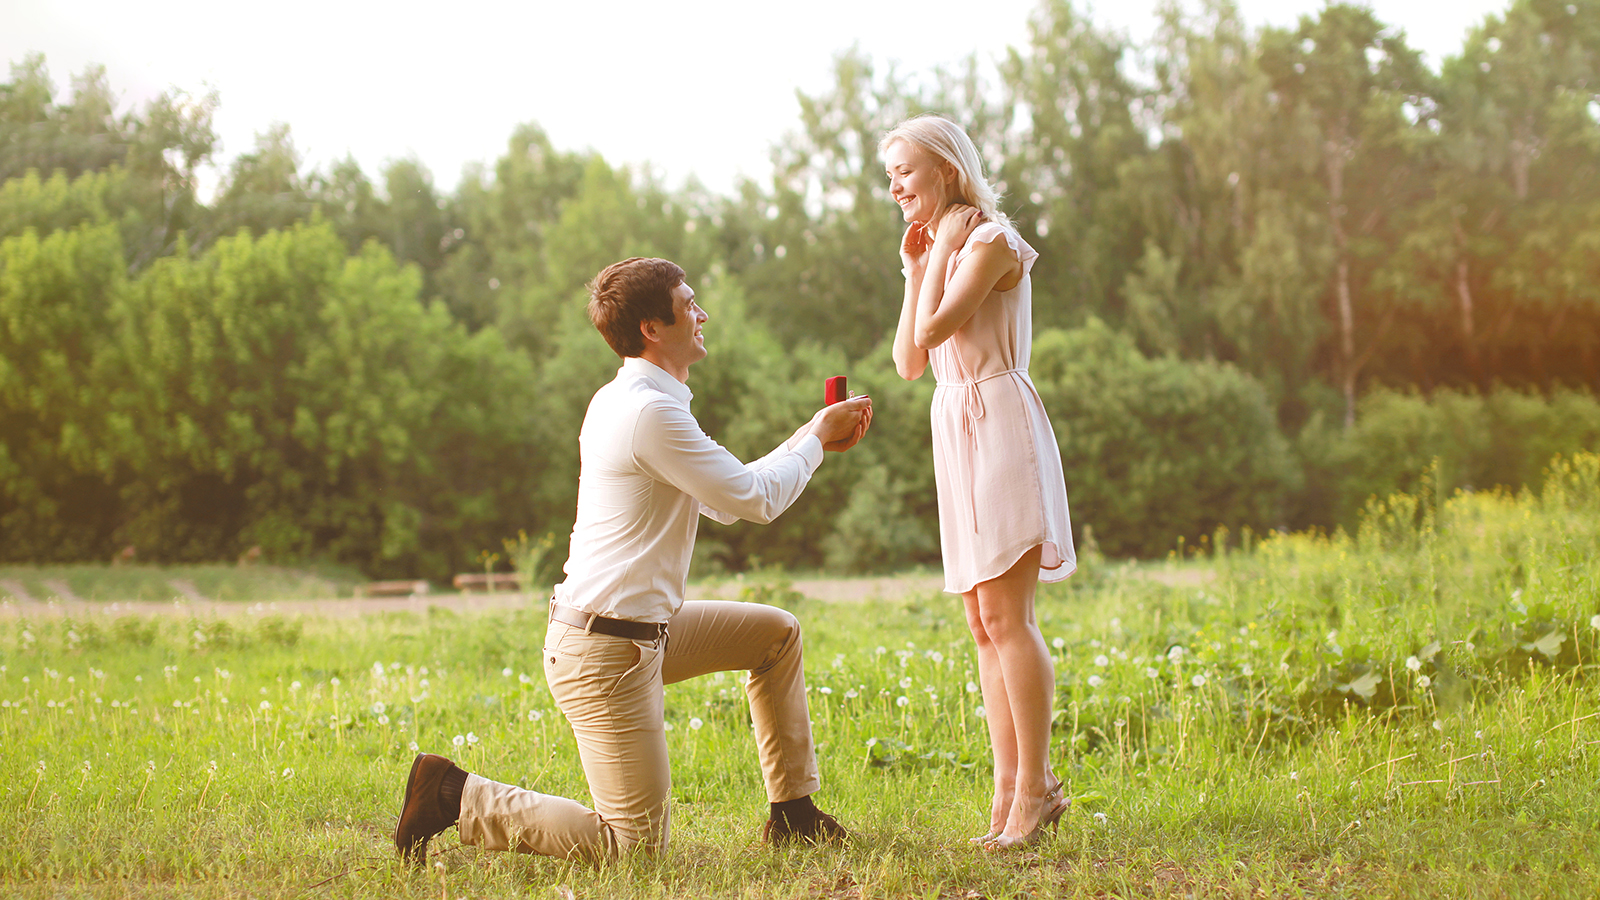 Man proposing ring woman, love, couple, date, wedding - concept